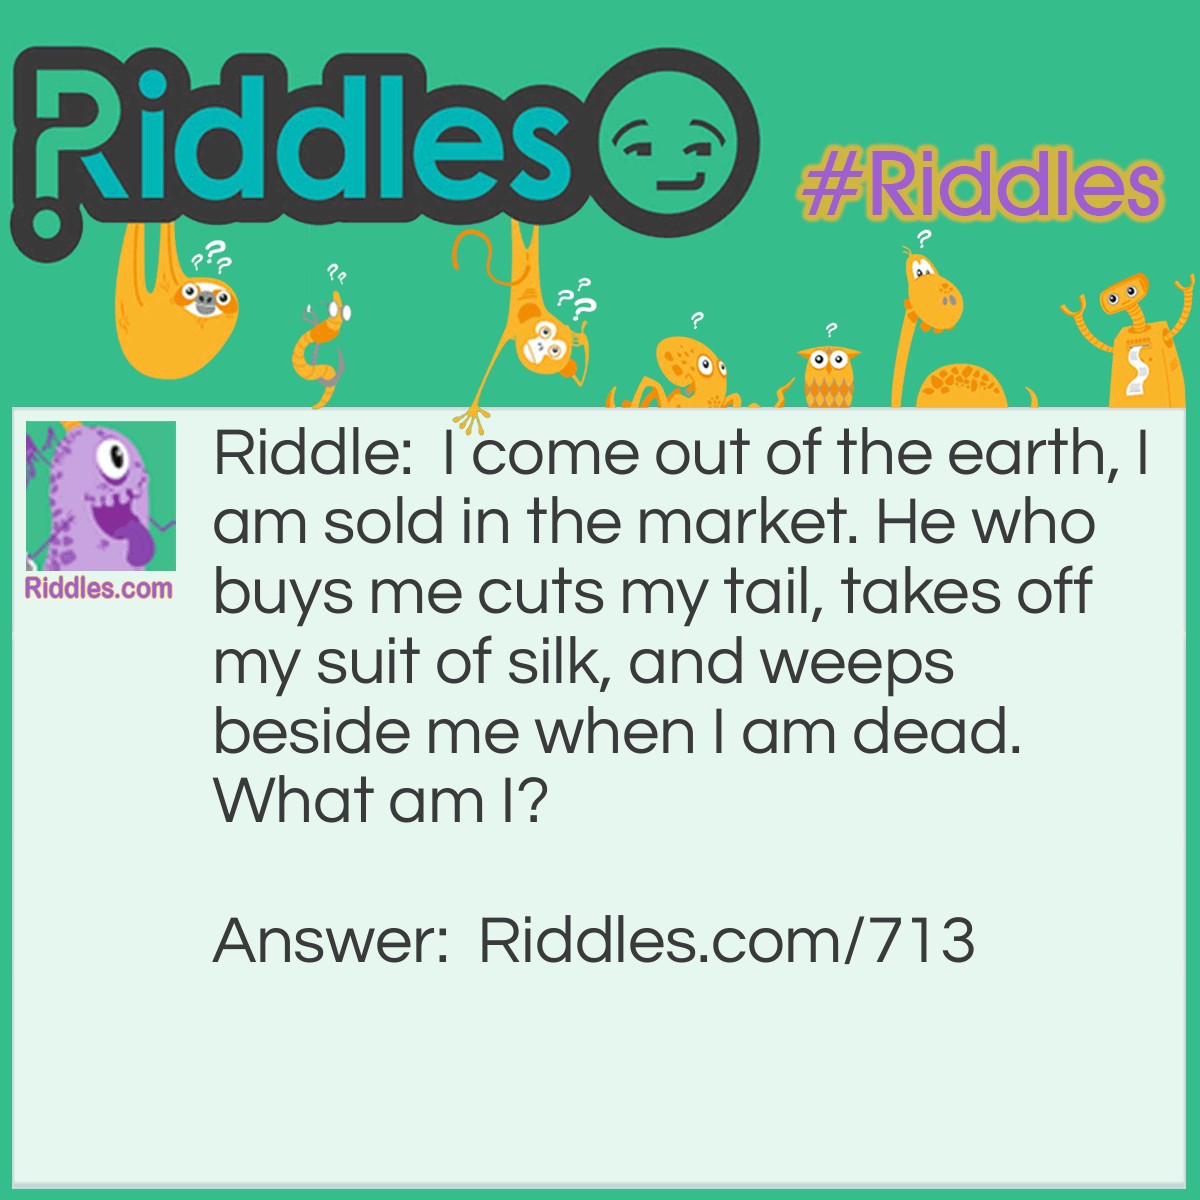 Riddle: I come out of the earth, I am sold in the market. He who buys me cuts my tail, takes off my suit of silk, and weeps beside me when I am dead.
What am I? Answer: I am an Onion.